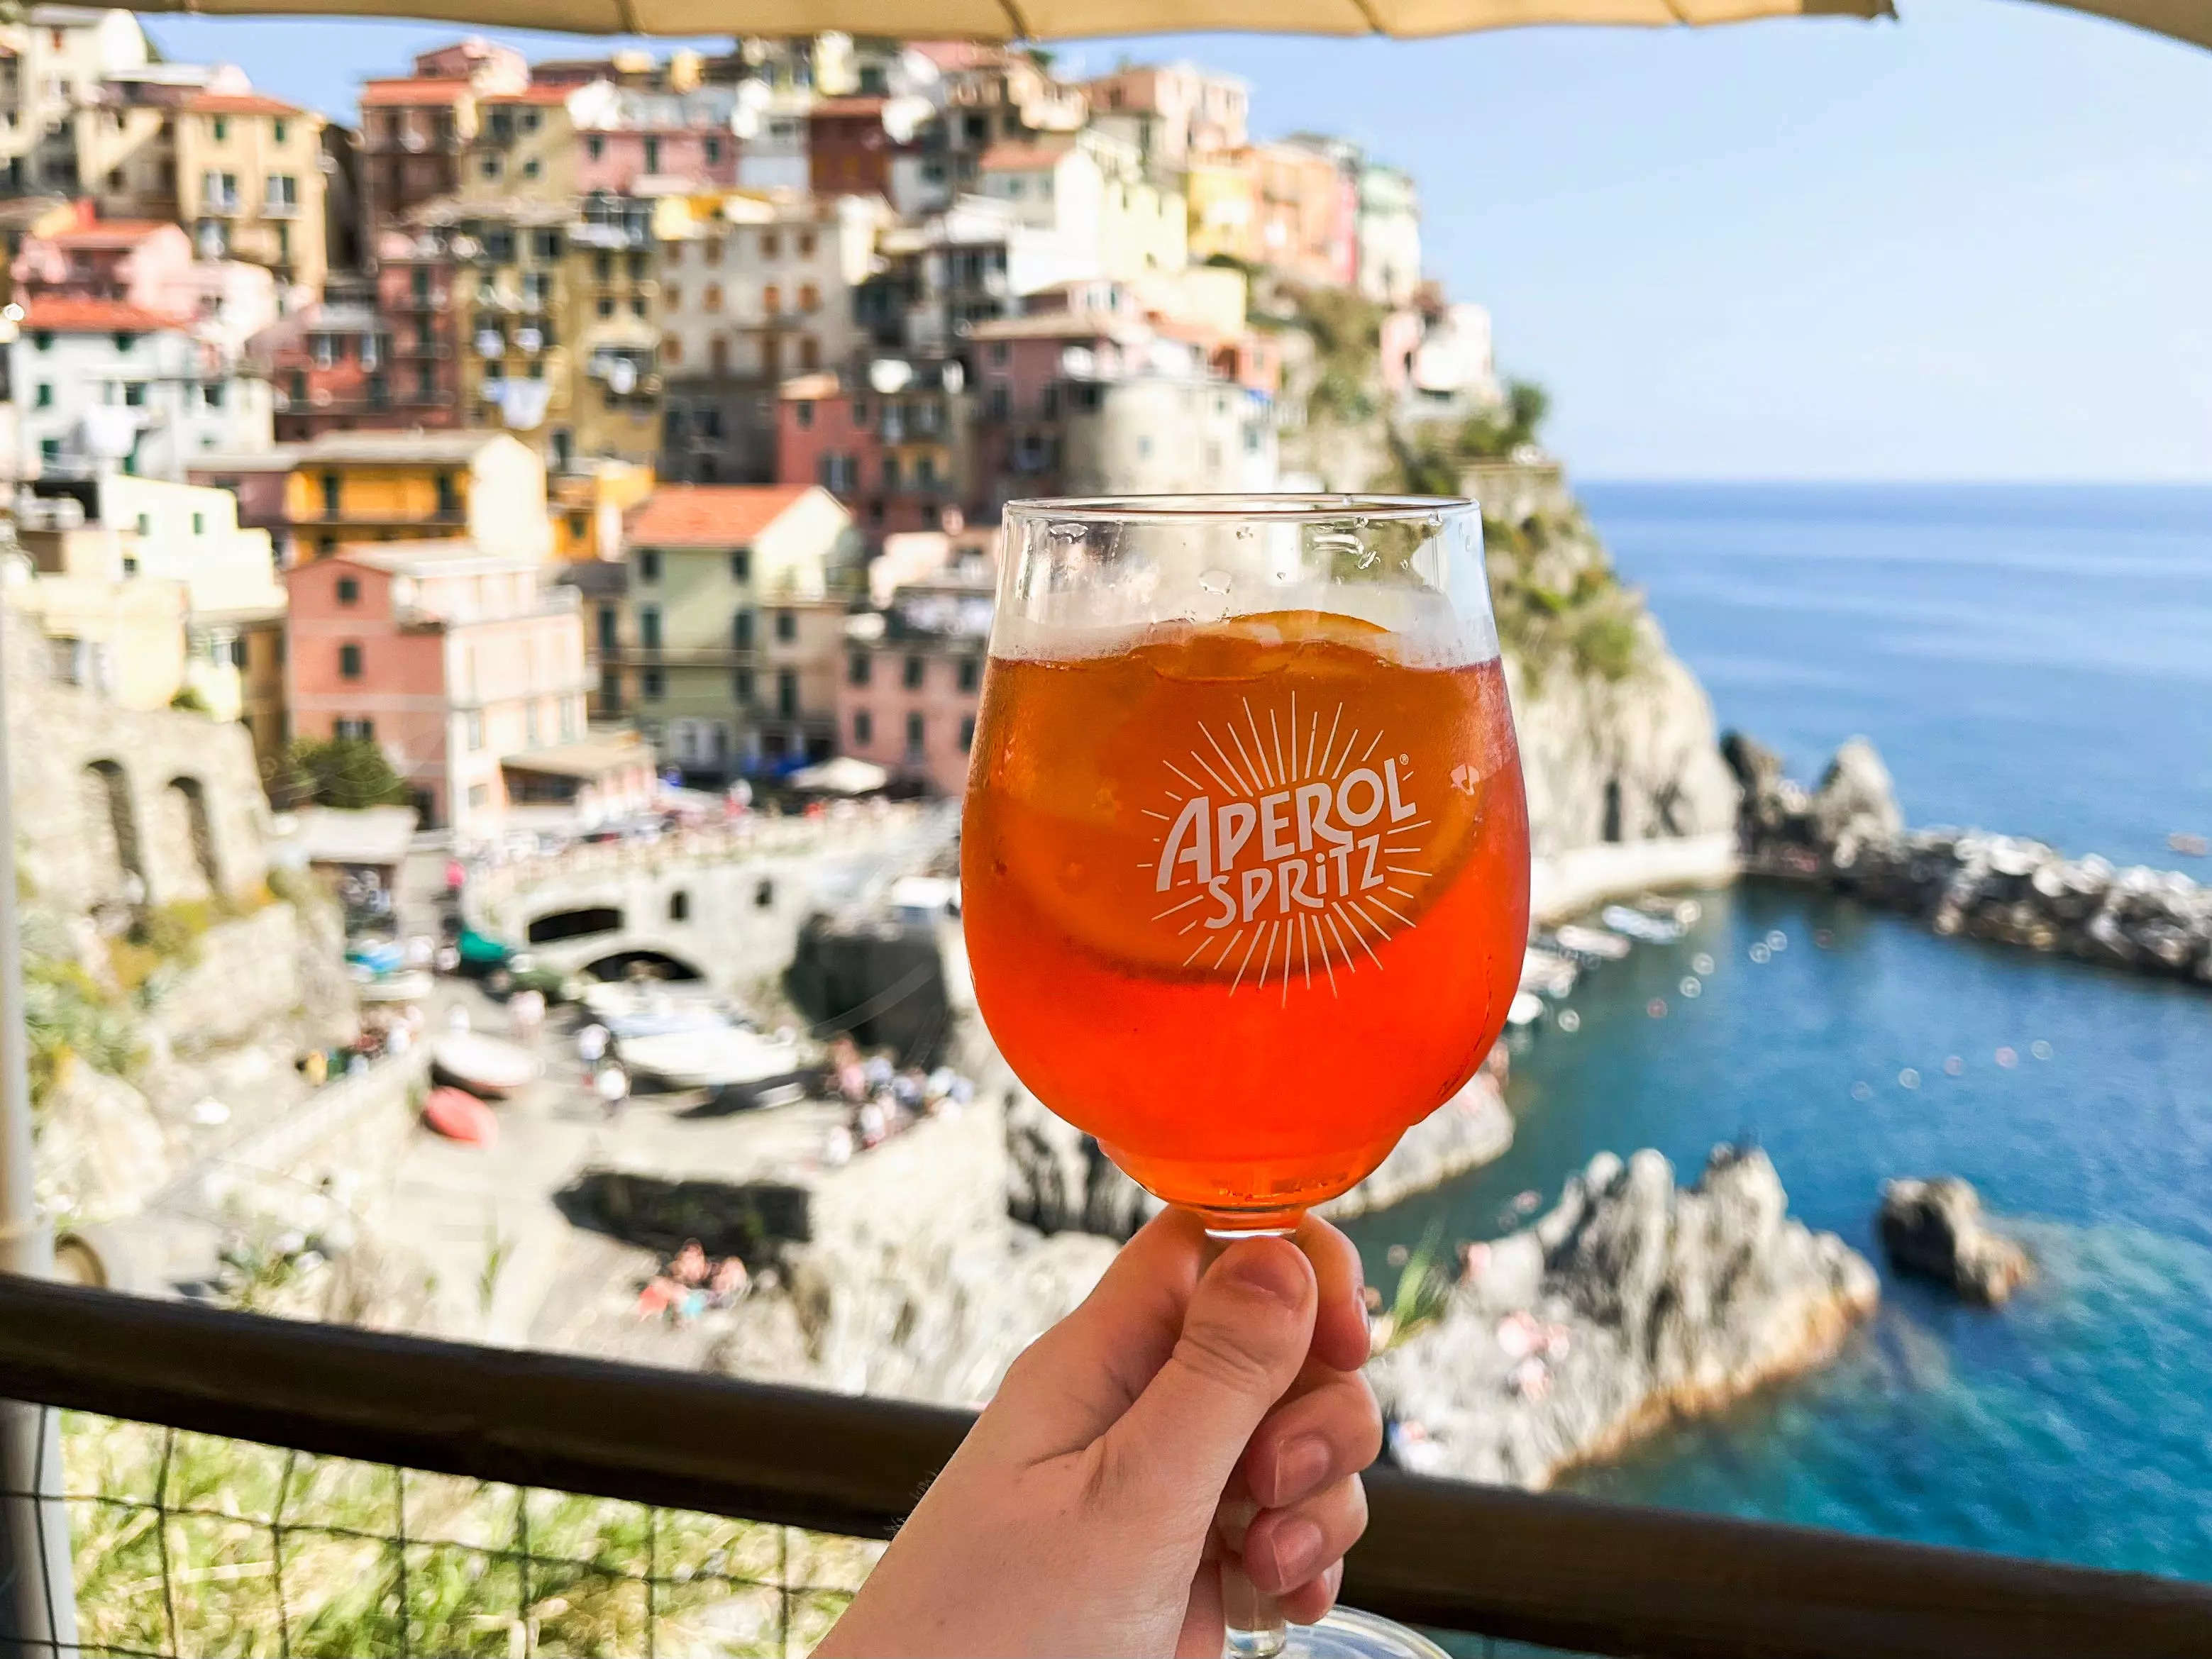 The author holds an Aperol Spritz in front of a colorful Italian town by the water.